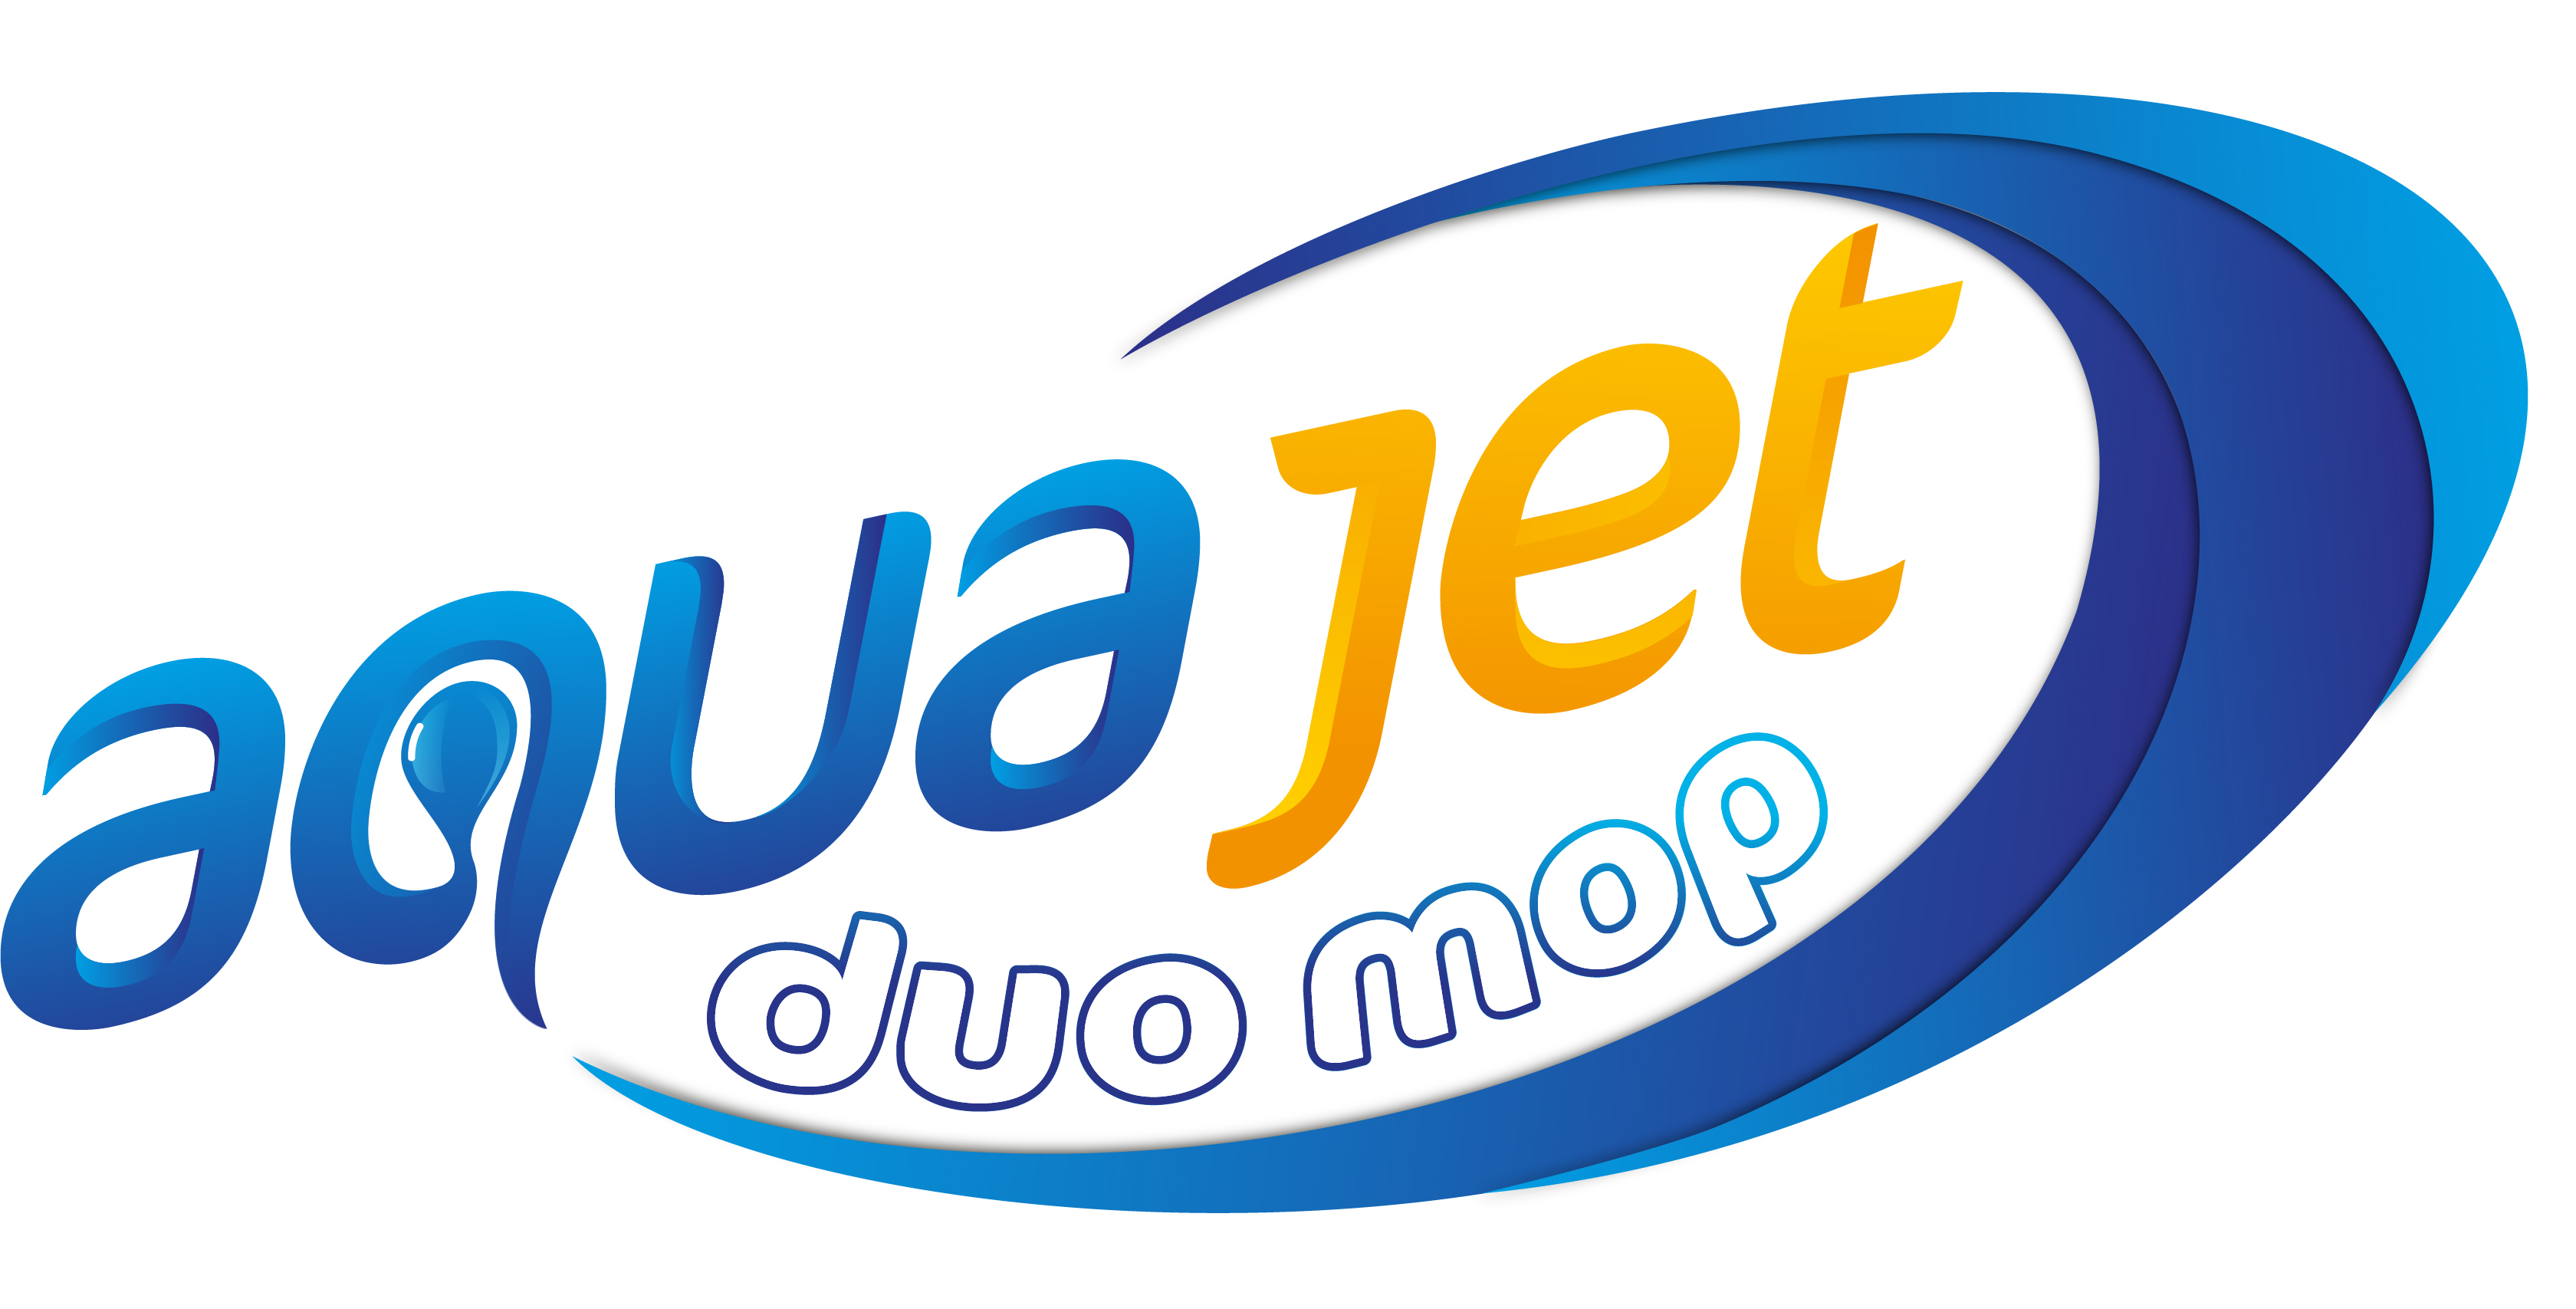 Aqua Jet Duo Mop_01 logo design by logo designer John Mills Ltd for your inspiration and for the worlds largest logo competition